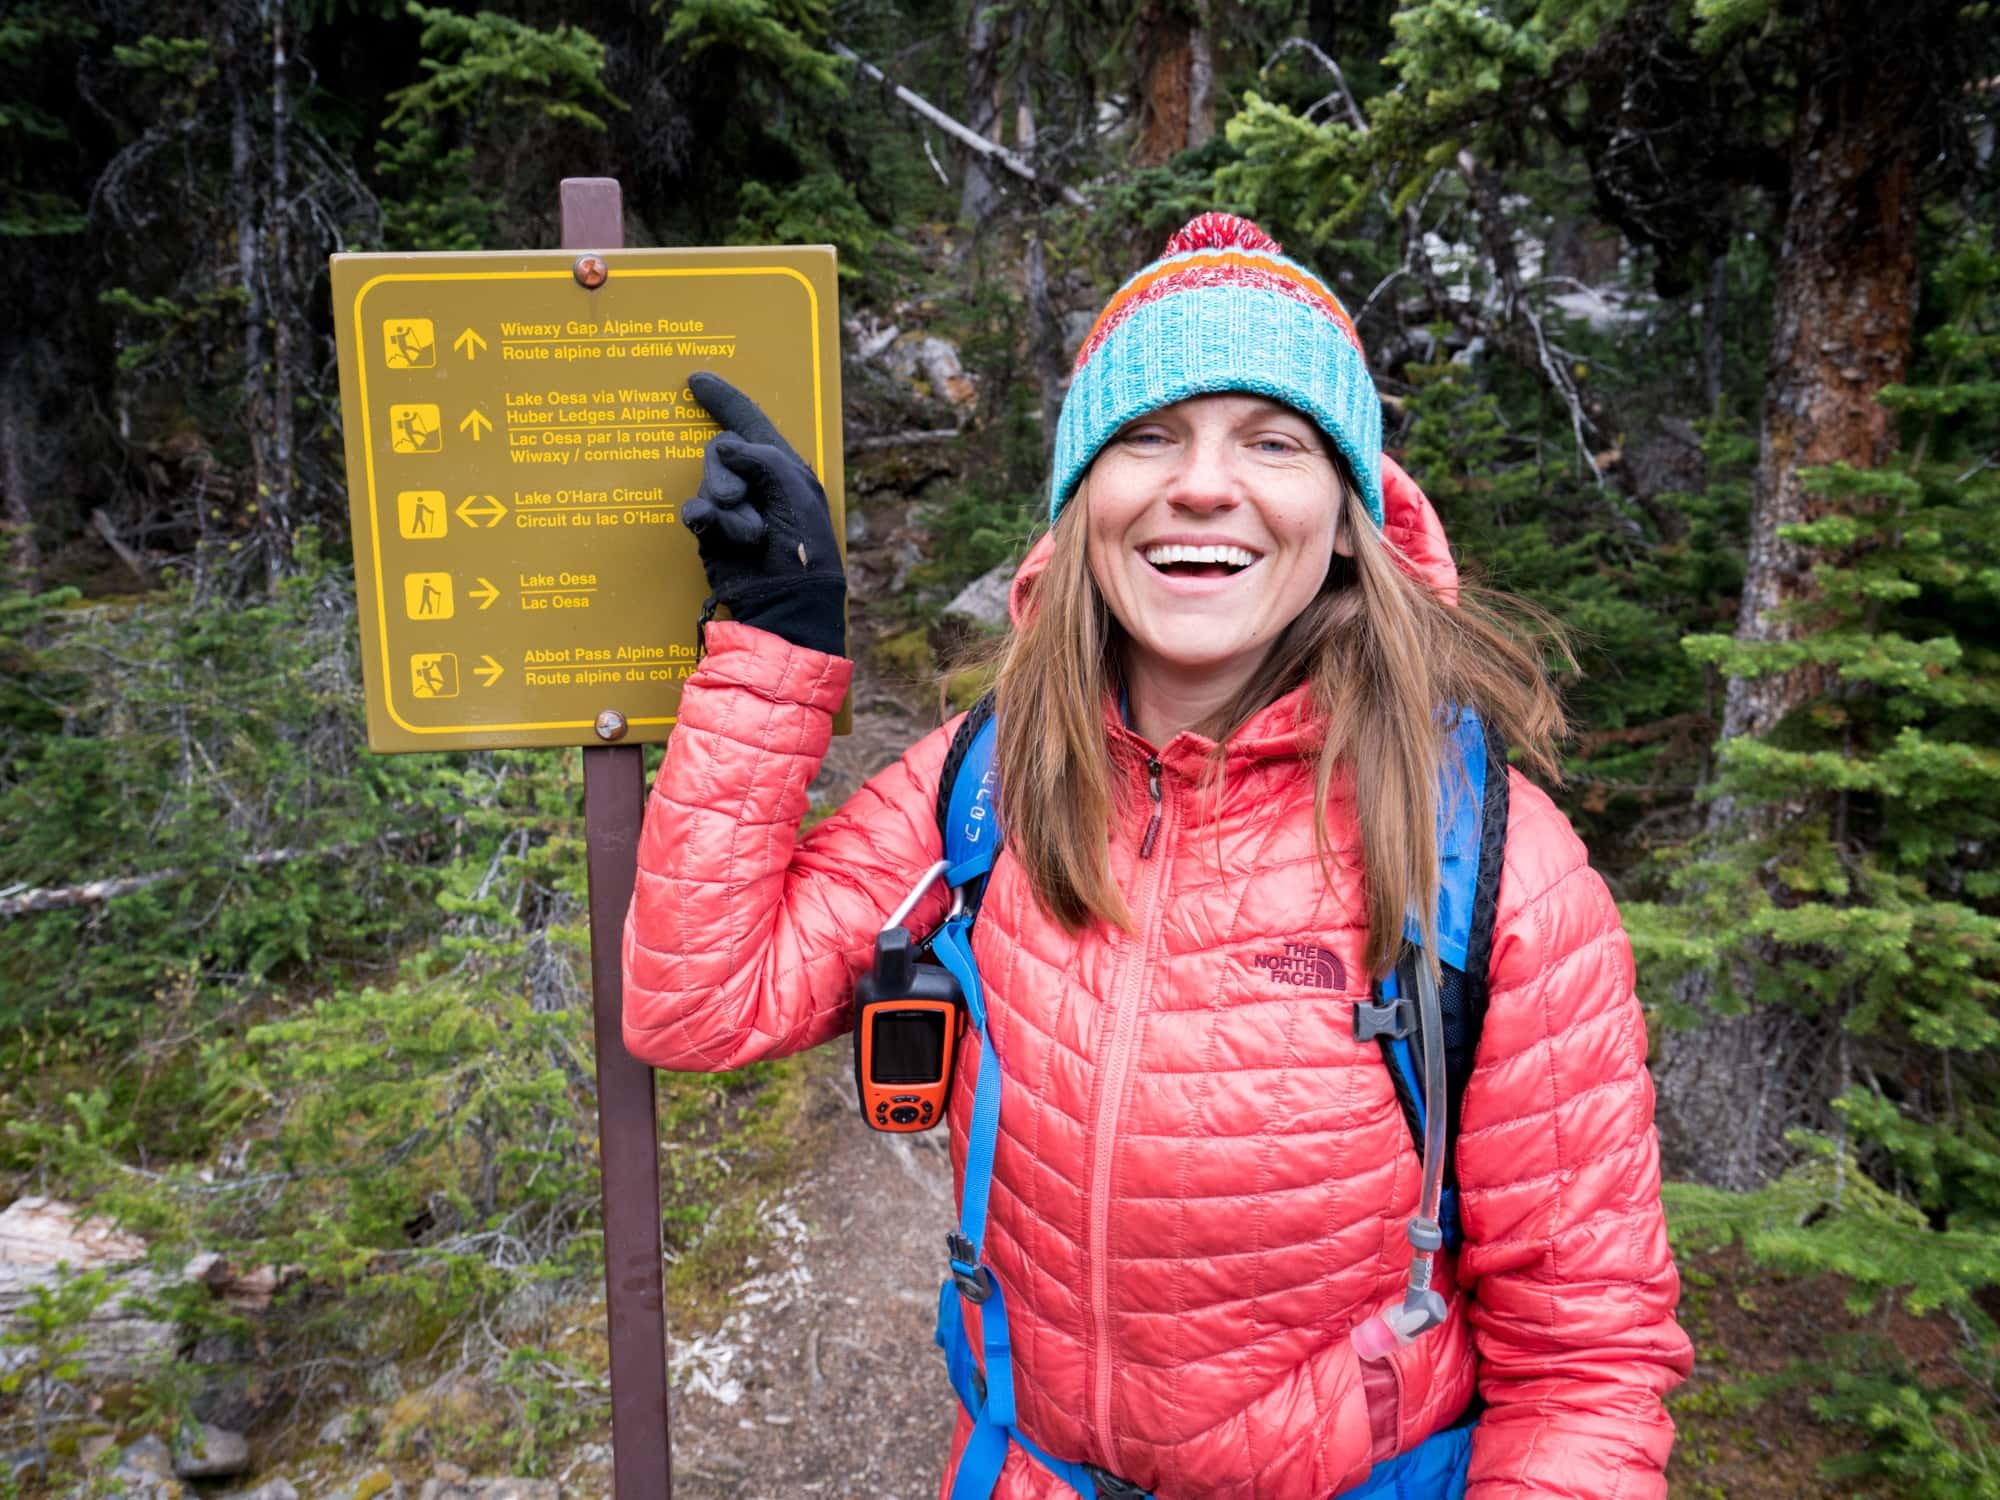 A woman points to a sign on a hiking trail. She is wearing a beanie, gloves, puffy jacket, and has the Garmin inReach Explorer clipped to her daypack